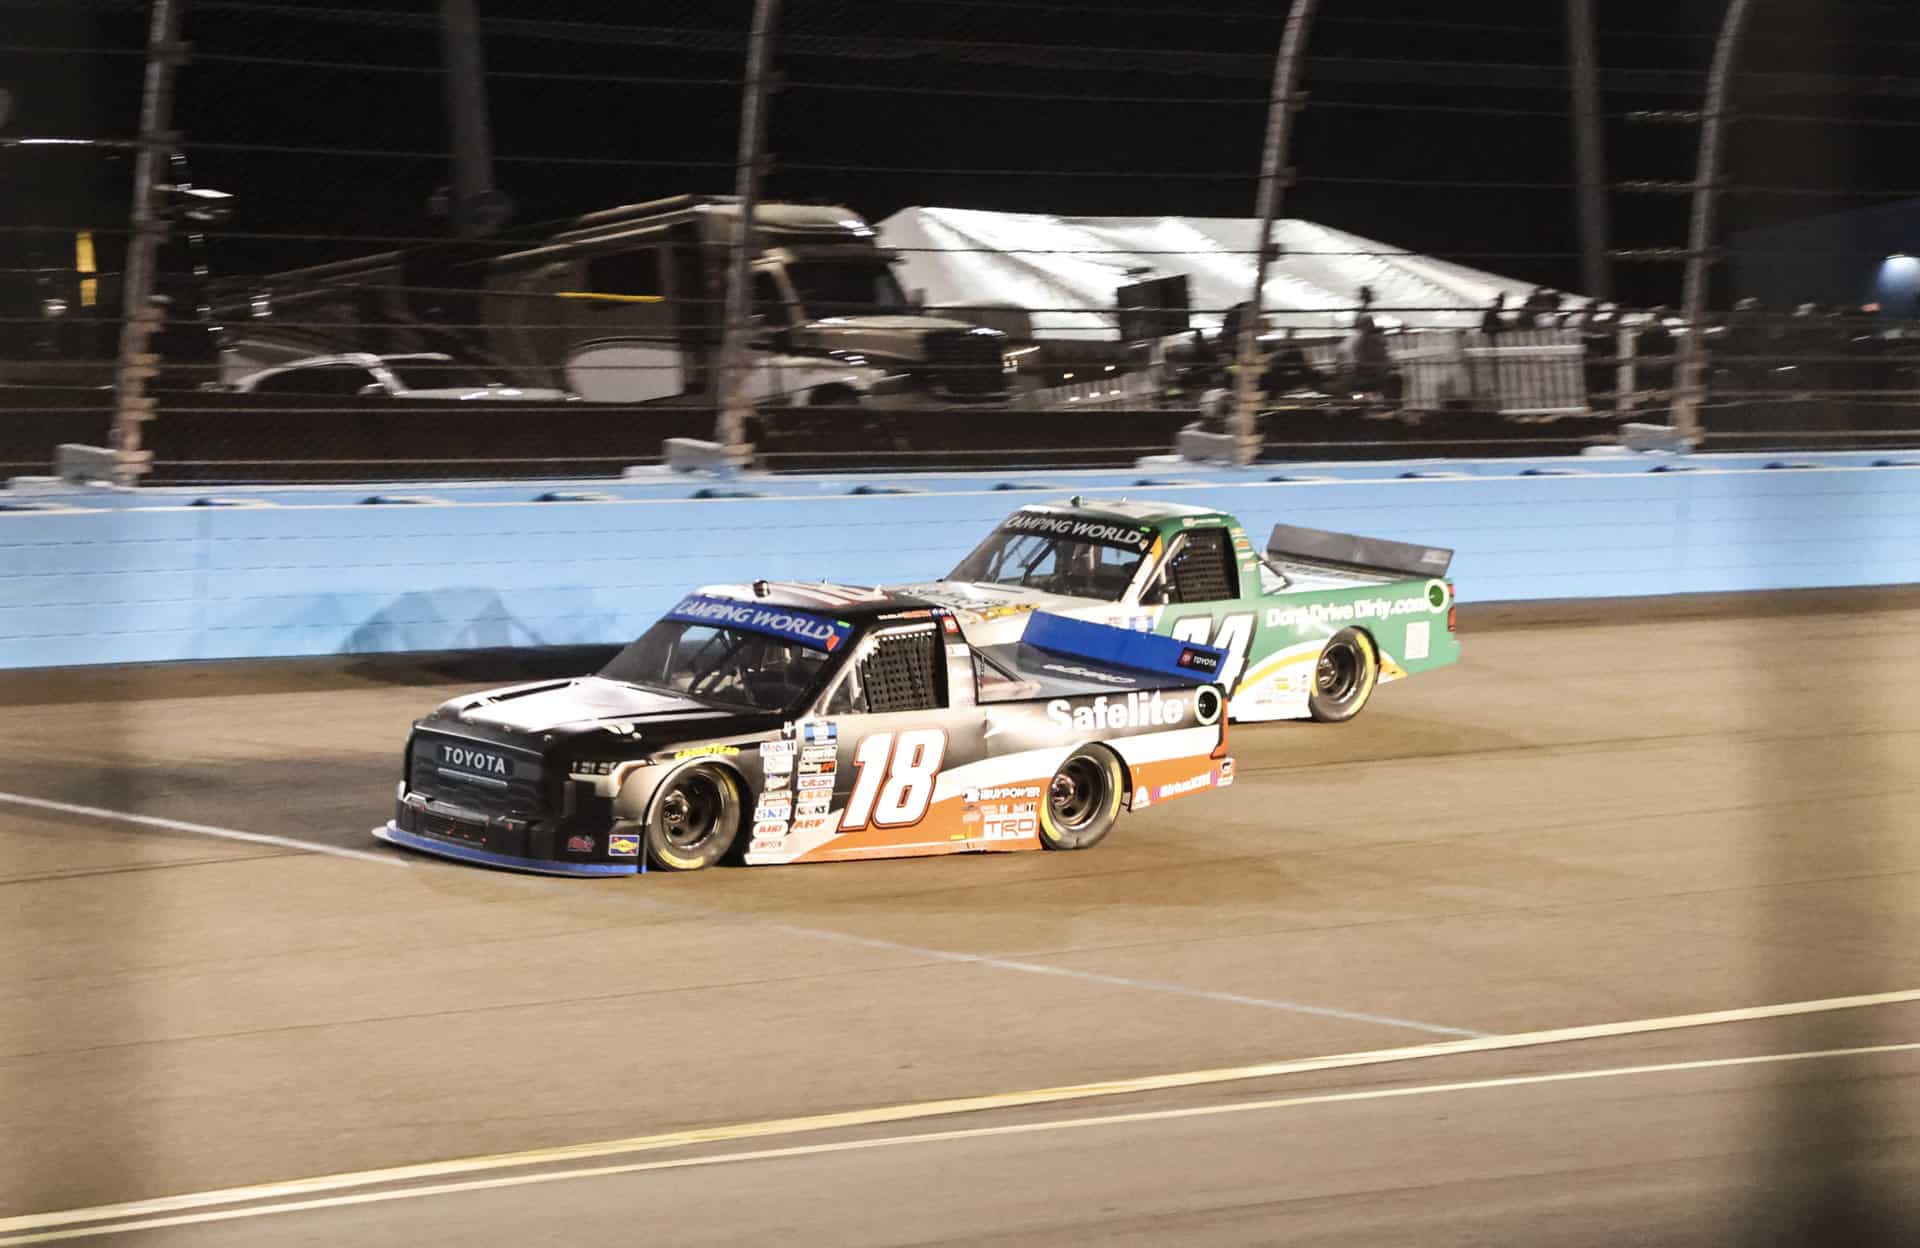 Chandler Smith comes up just shy of the 2022 NASCAR Camping World Truck Series championship.